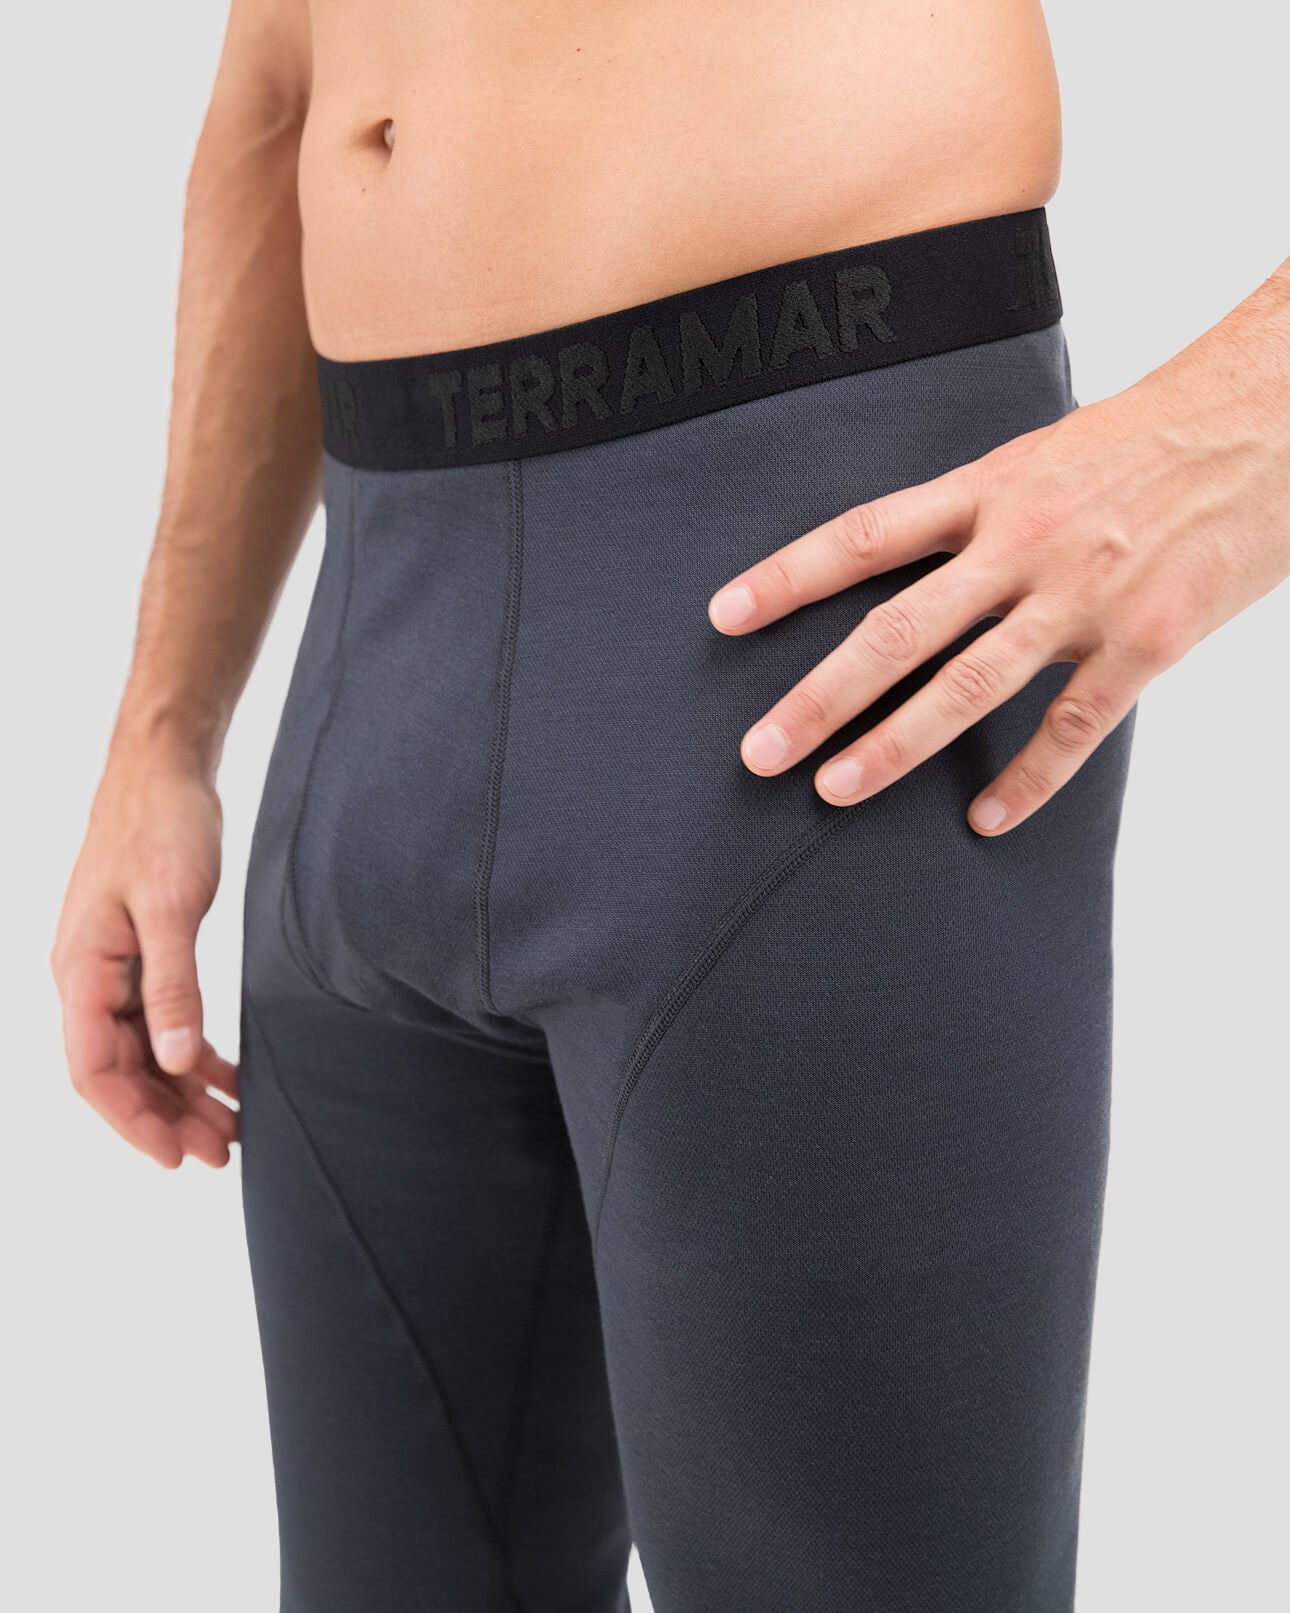 Men's Thermawool® Heavyweight Thermal Pants | Color: India Ink Heather